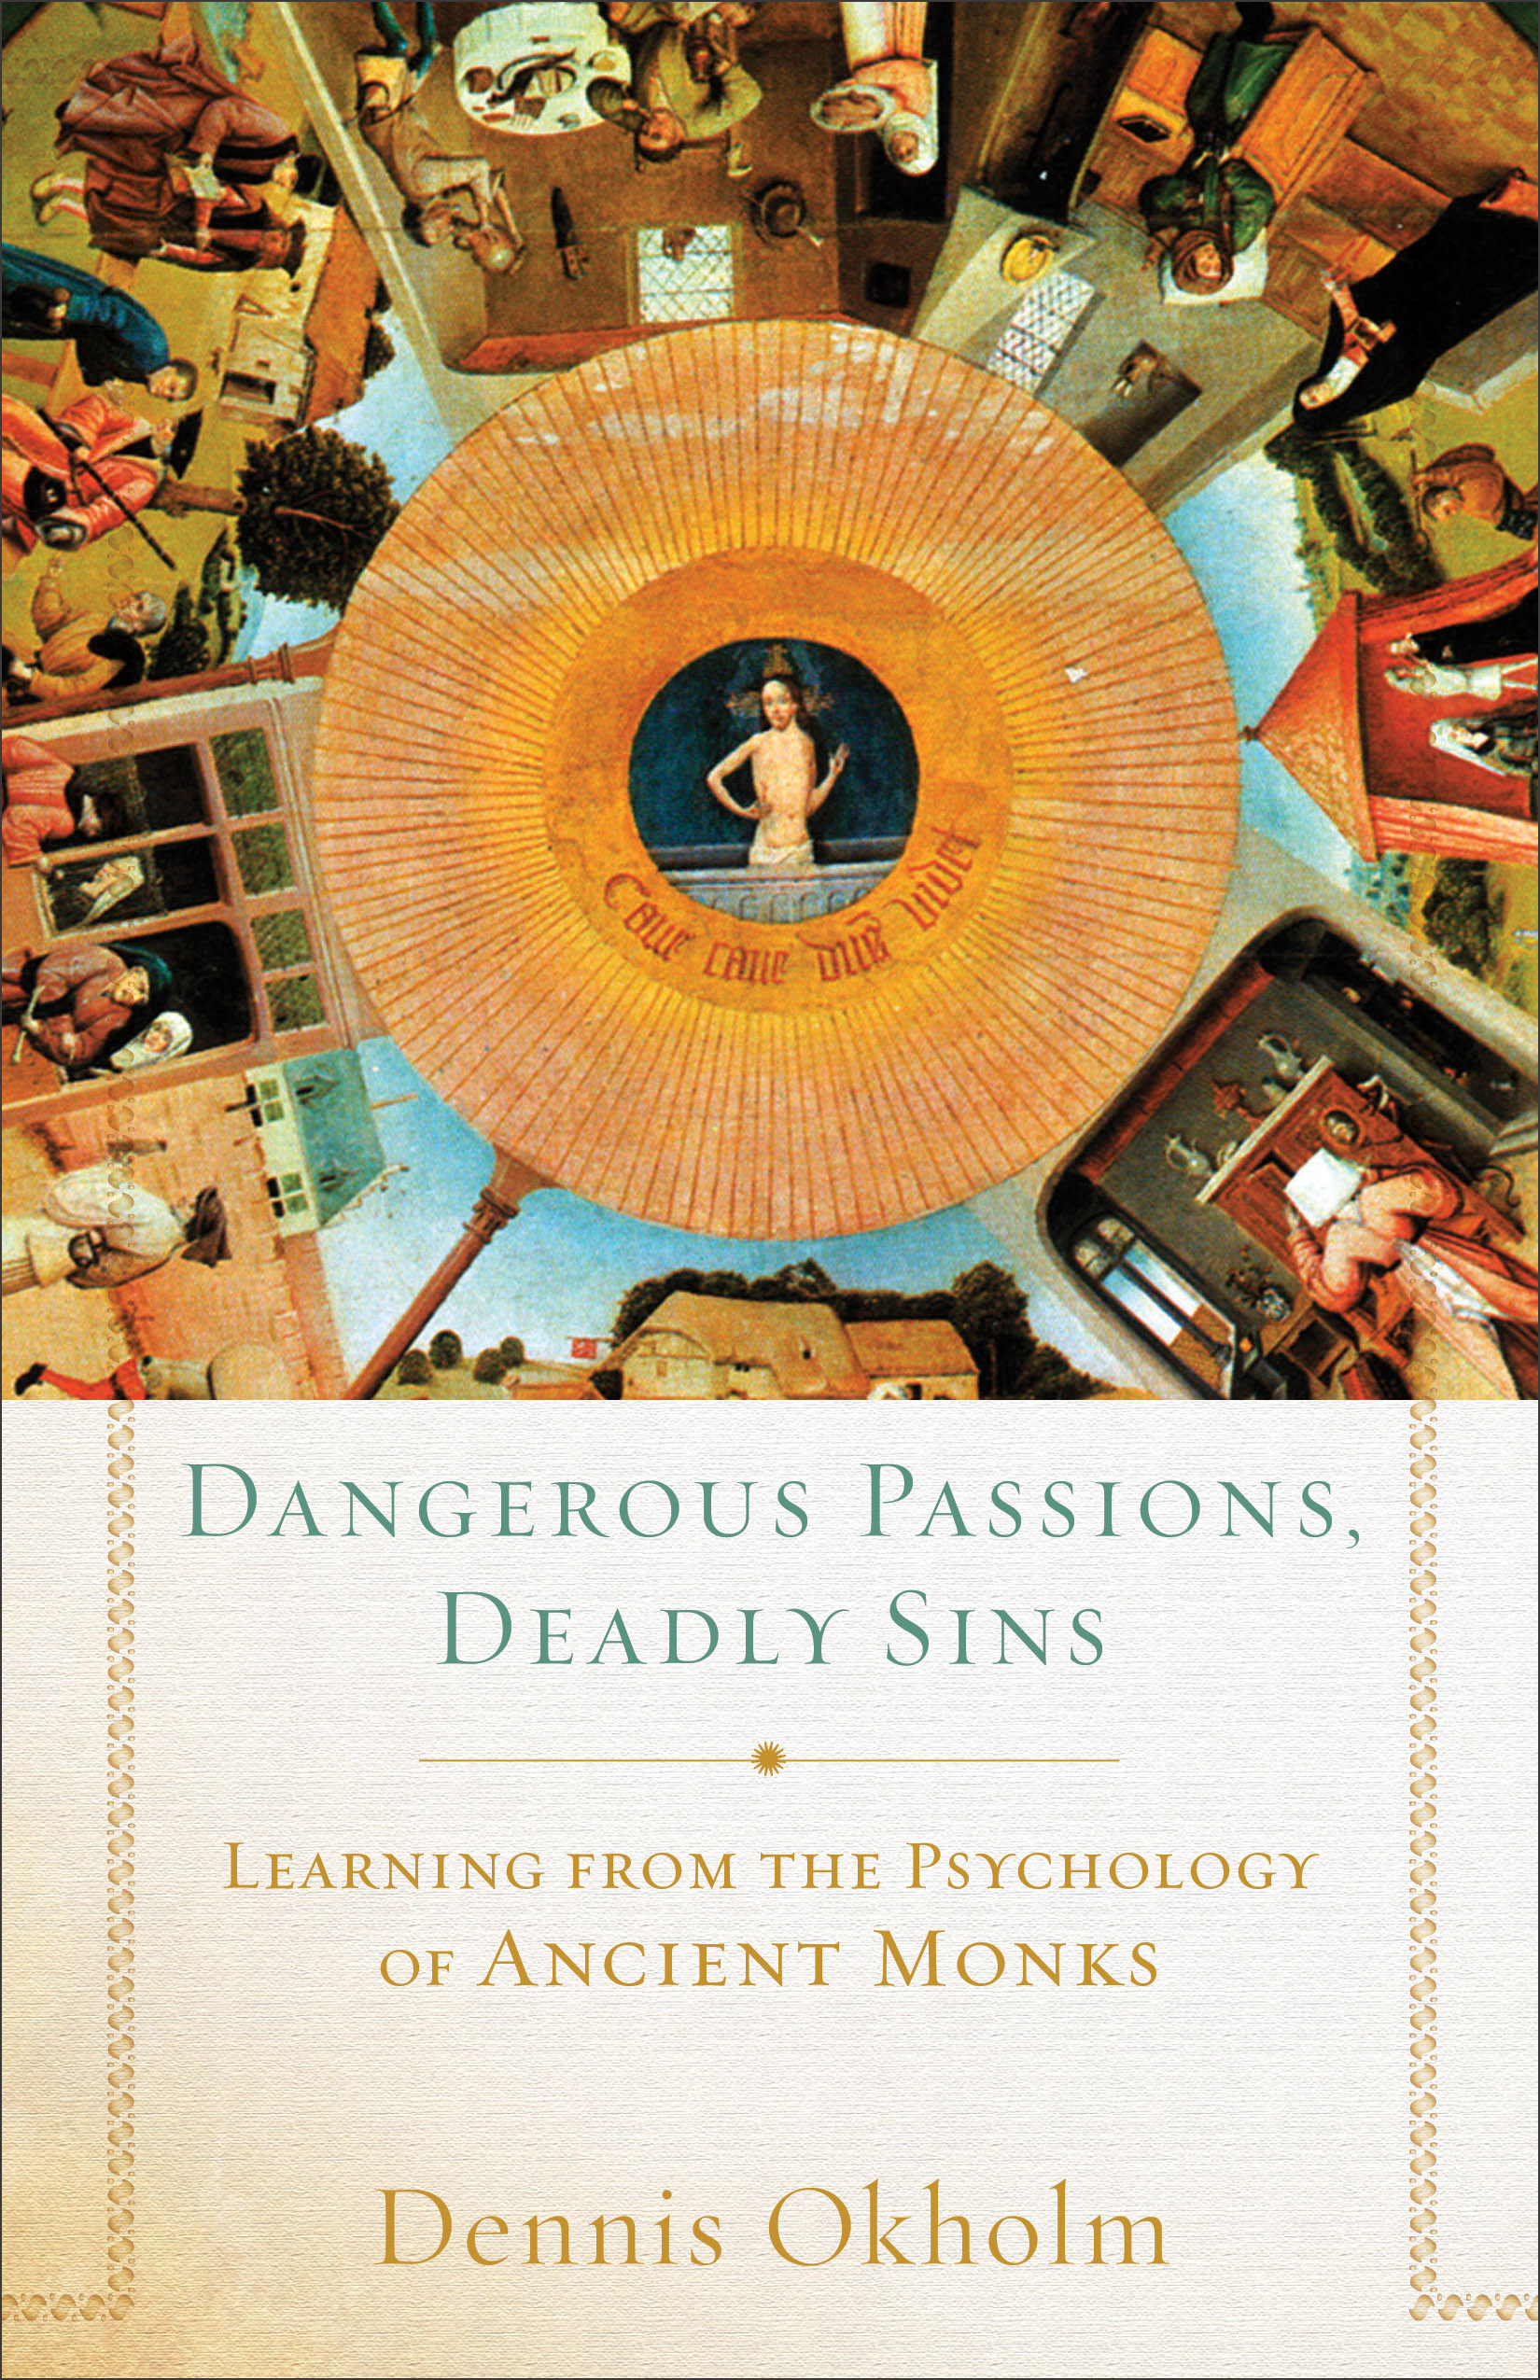 Dangerous Passions, Deadly Sins: Learning from the Psychology of Ancient Monks book cover